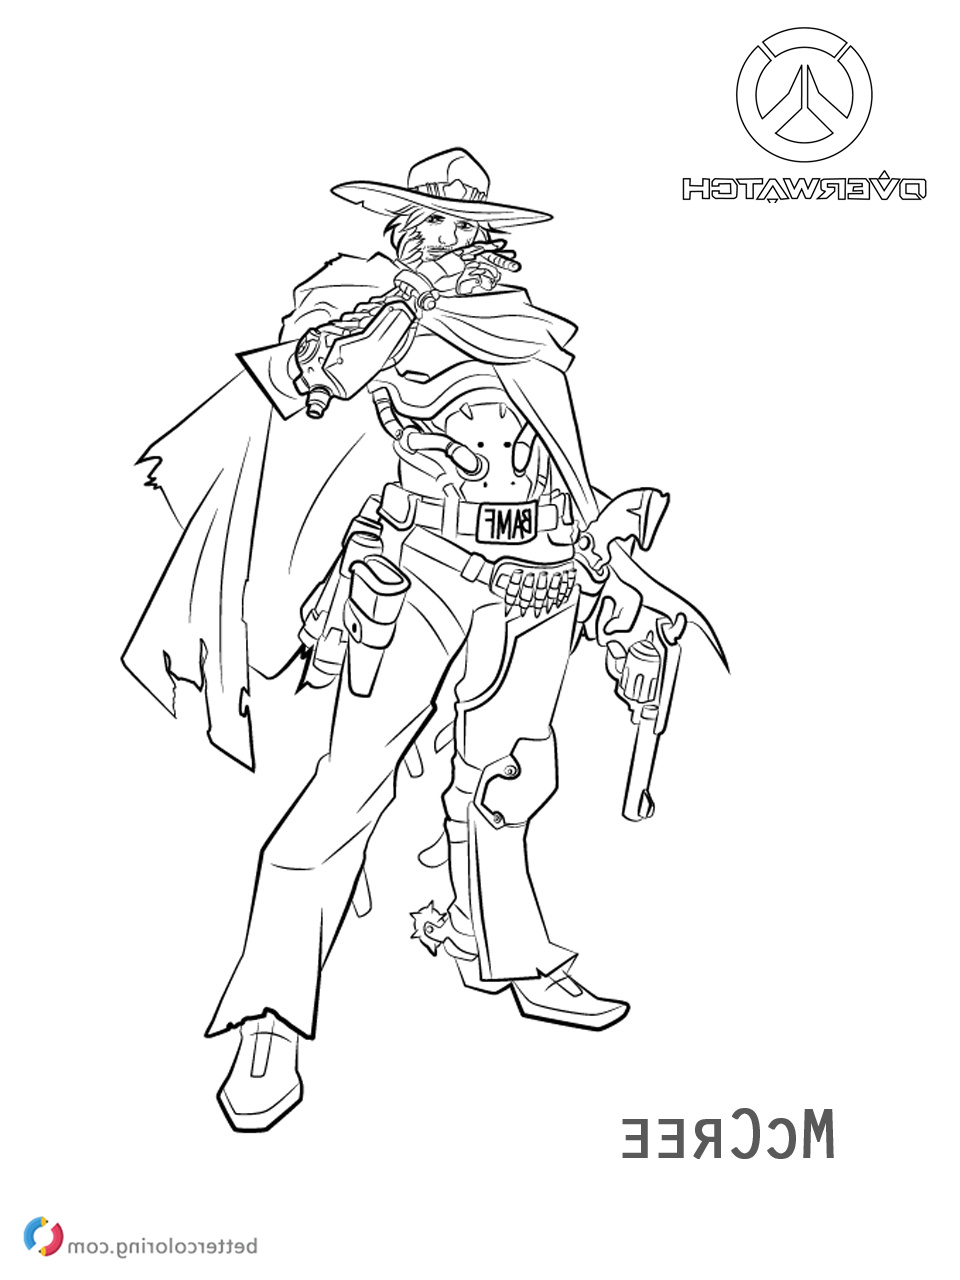 mccree from overwatch coloring pages